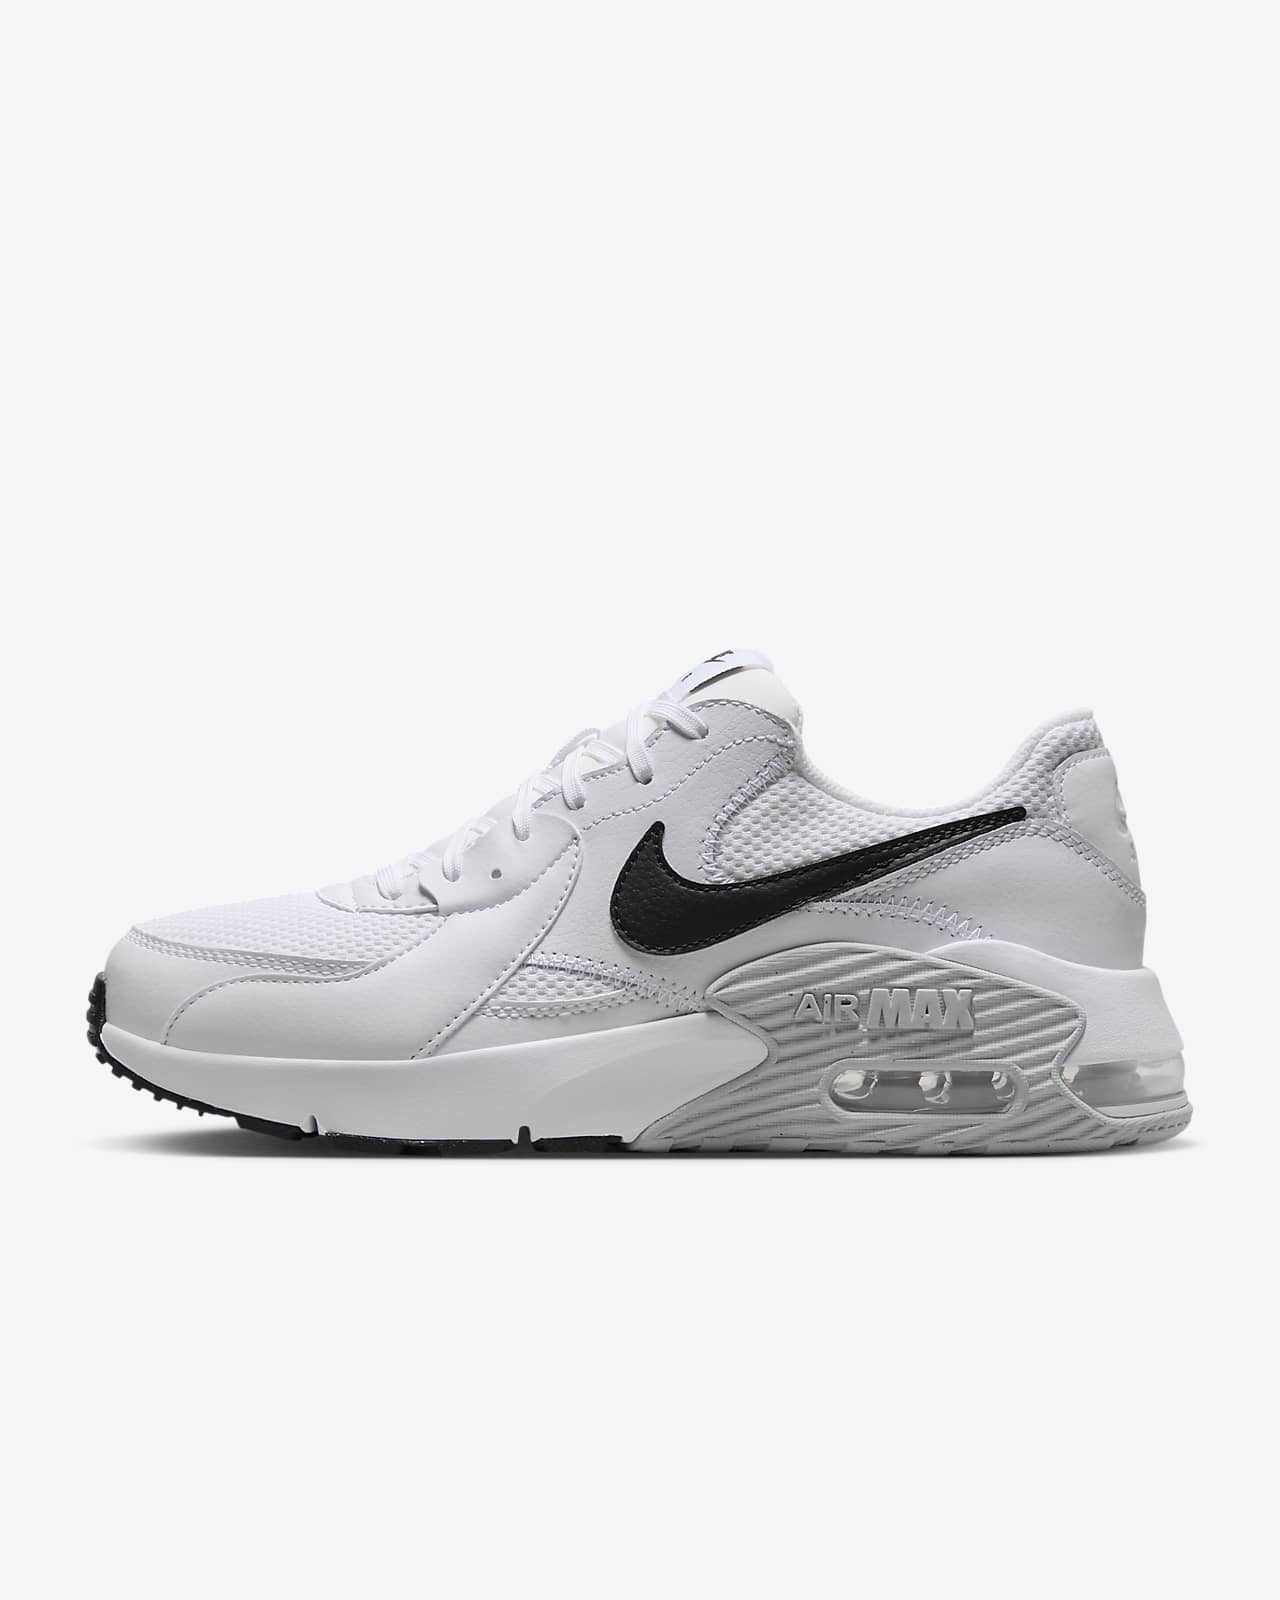 Nike Air Max Excee Women's Shoes اسعار سوناتا